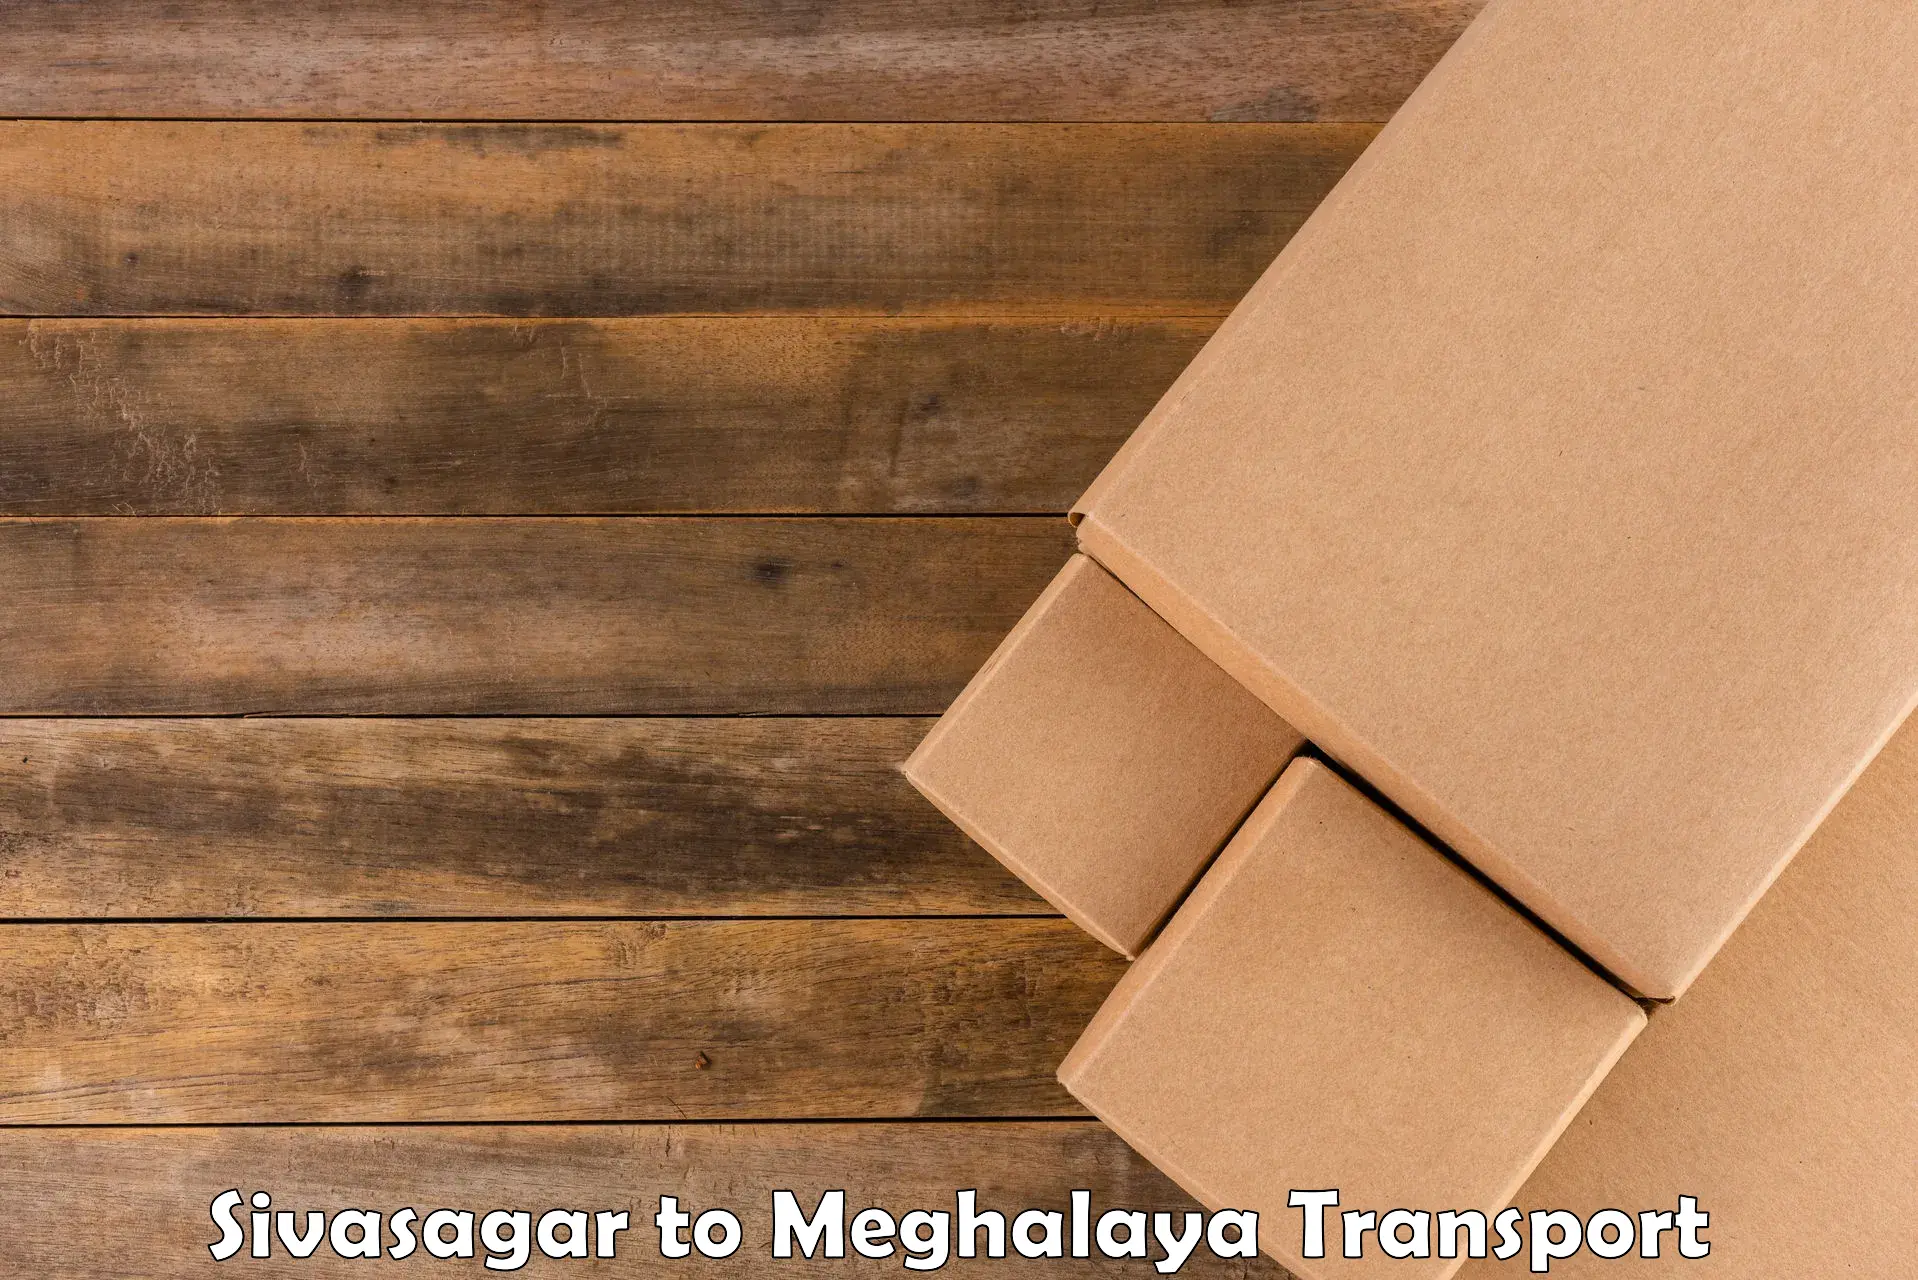 Package delivery services Sivasagar to Shillong